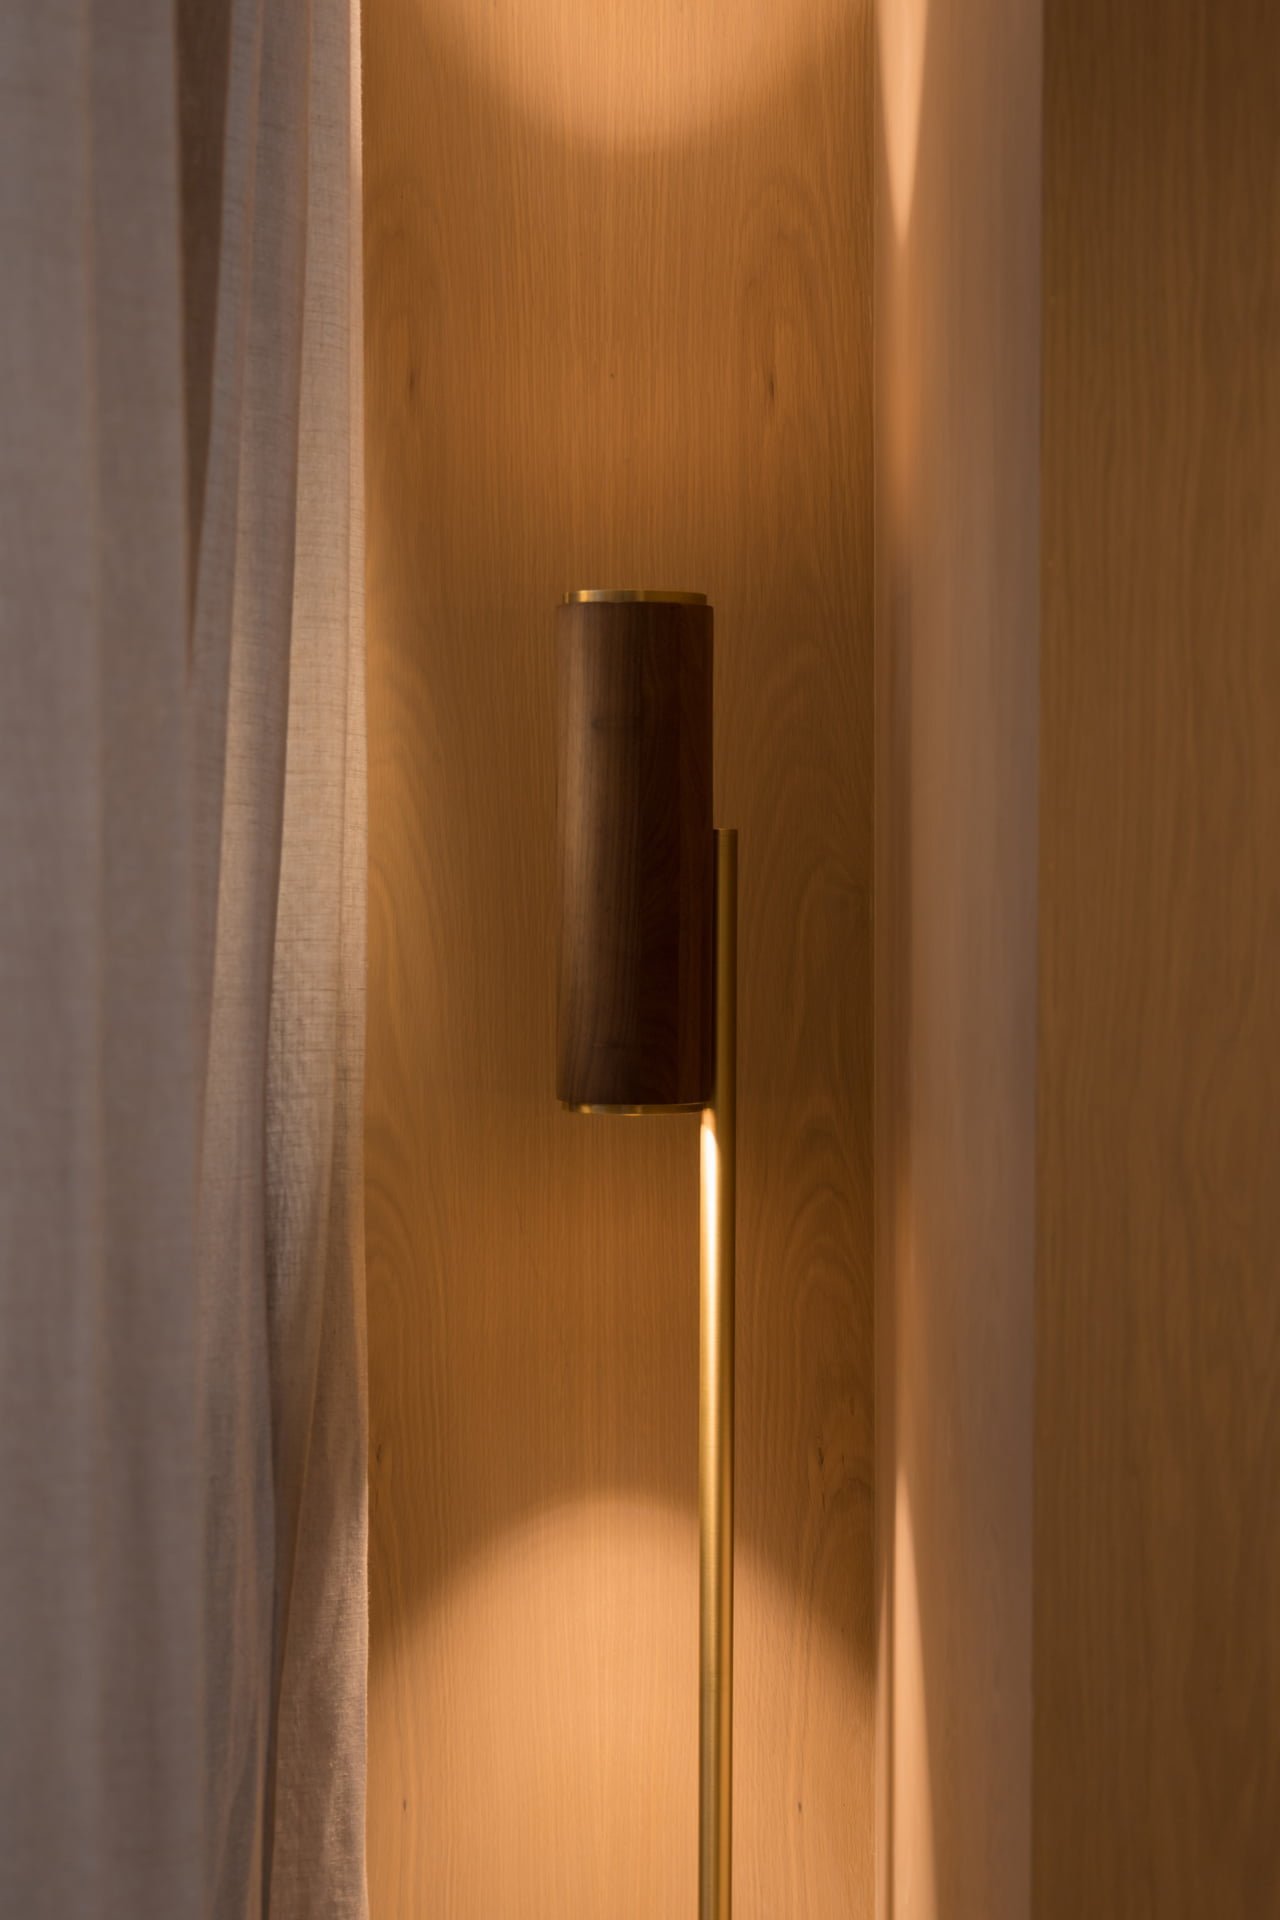 Modern Wood ambient lighting designed by Bandido.